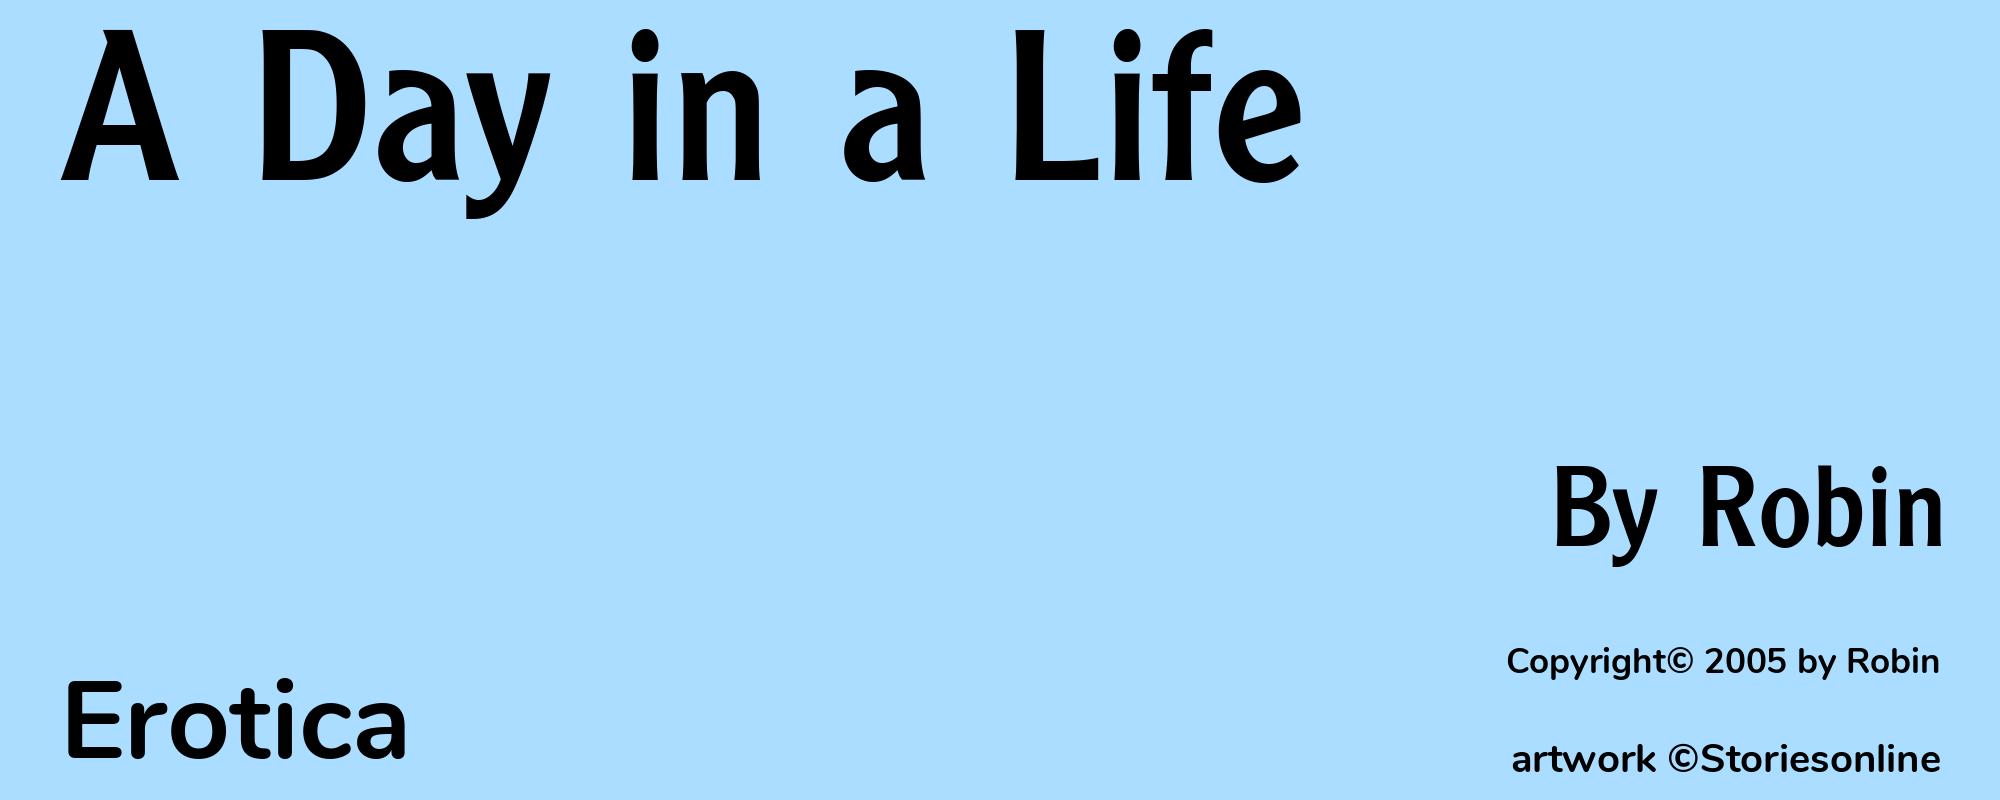 A Day in a Life - Cover